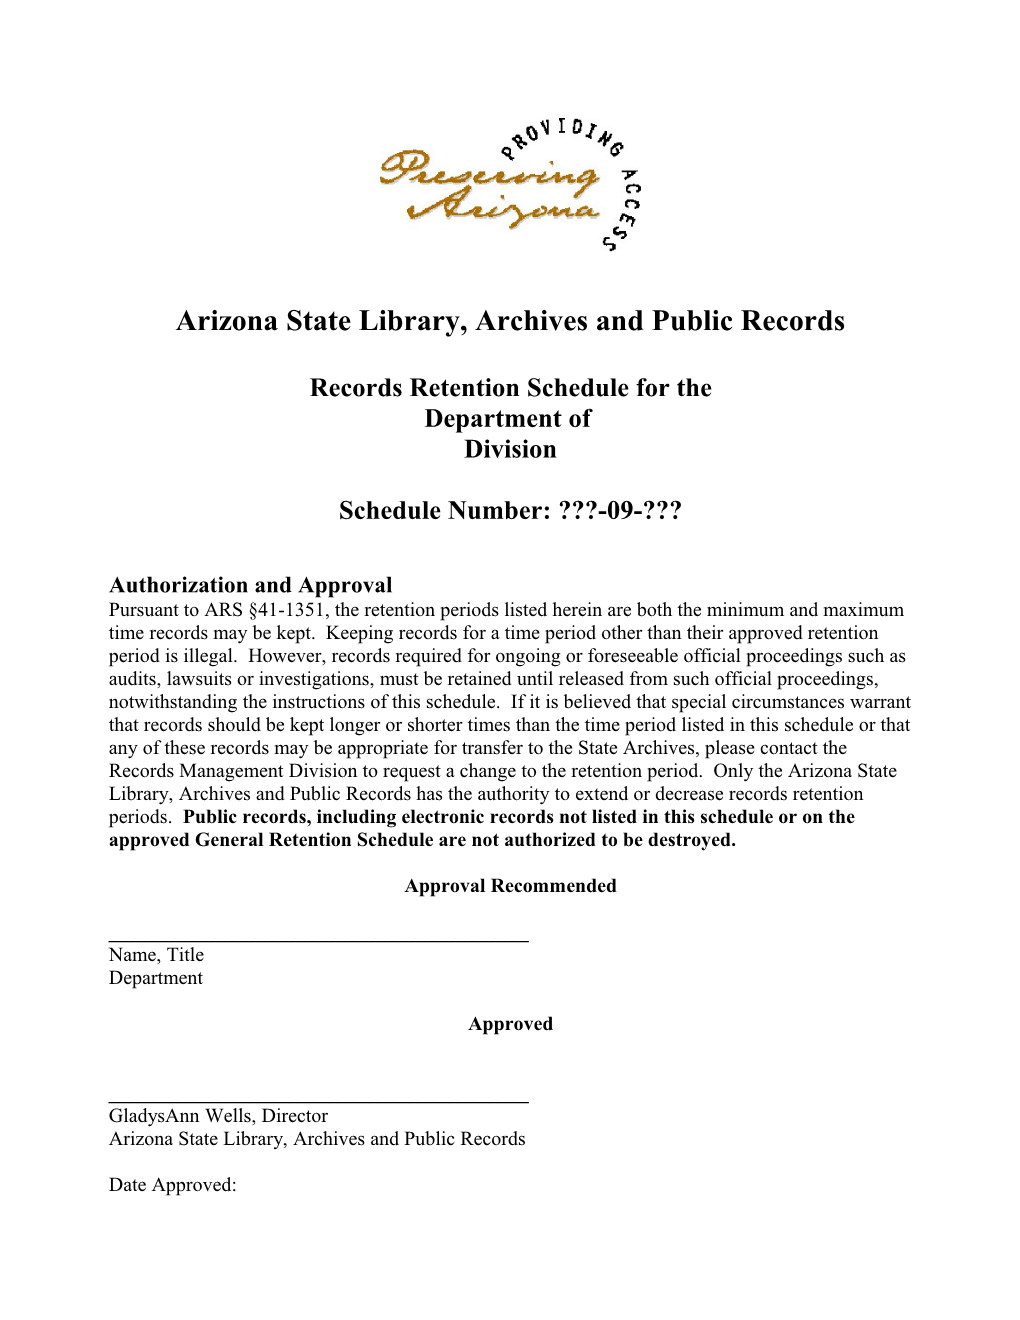 Arizona State Library, Archives and Public Records